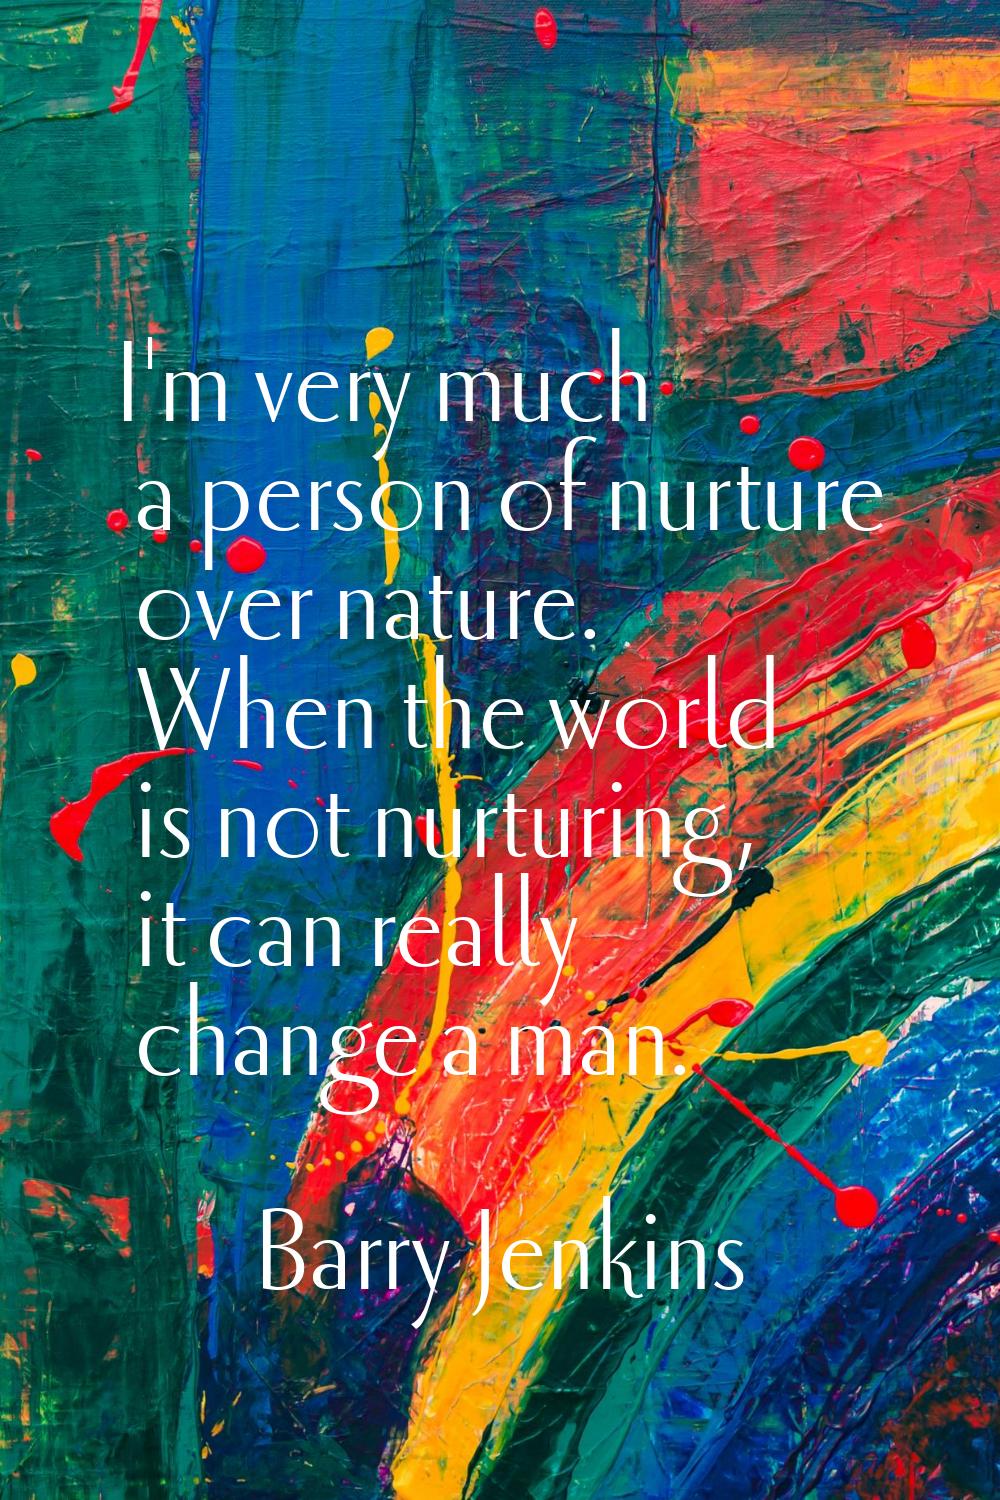 I'm very much a person of nurture over nature. When the world is not nurturing, it can really chang